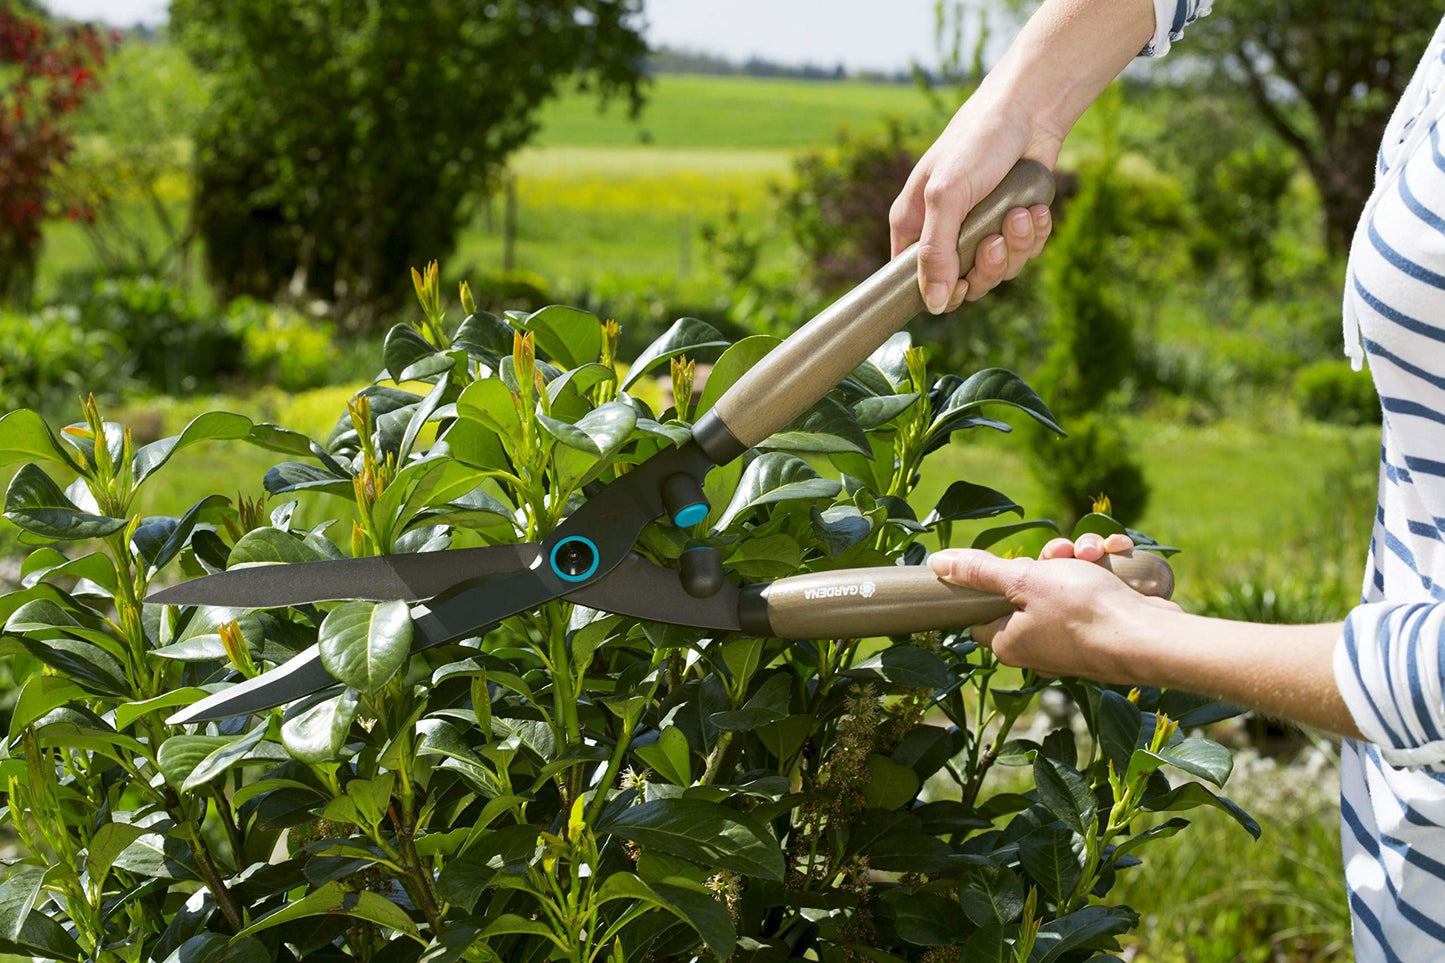 Gardena Naturecut Hedge Clippers: Sturdy Clippers for Cutting Hedges and Thicker Branches, 23 cm, with Non-Stick Blade Coating and Ergonomic Wooden Handles (12300-20)